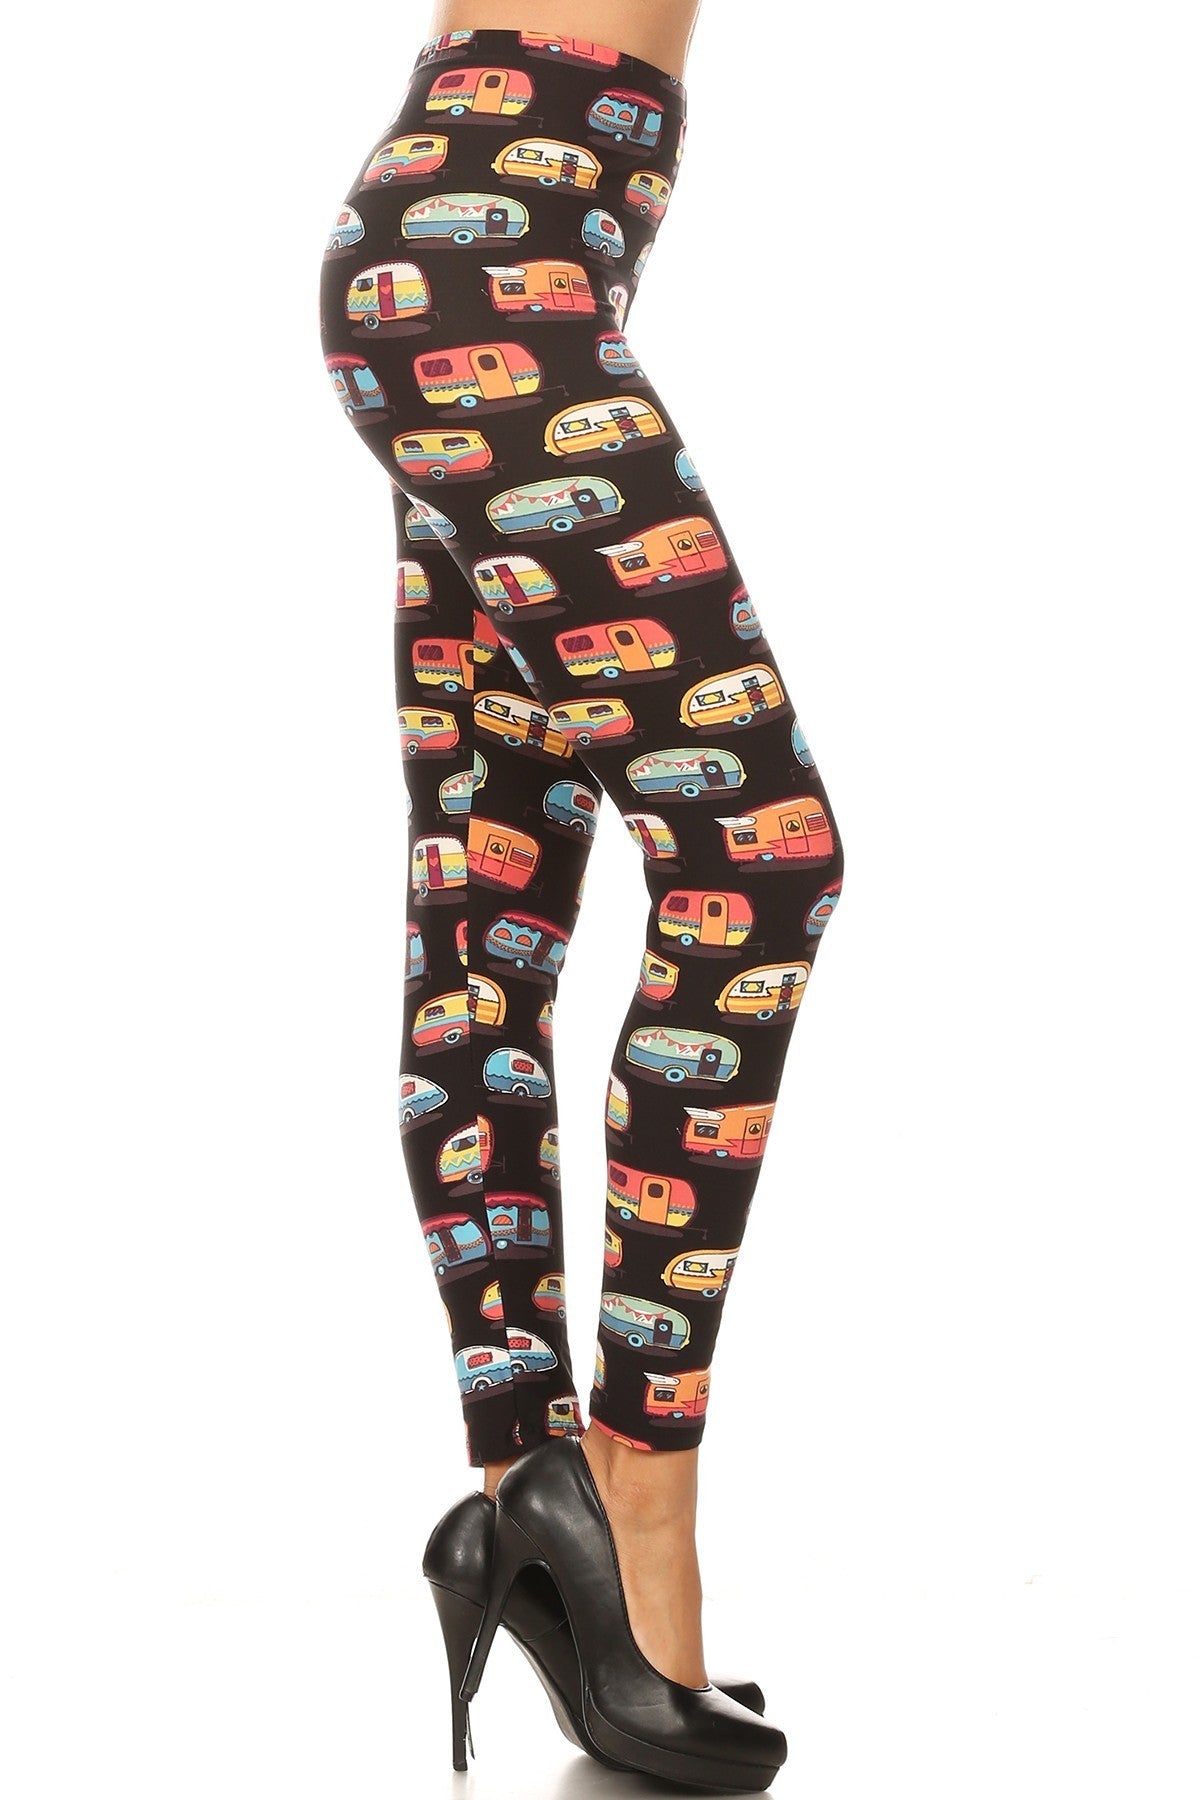 Multicolored Campers Printed, High Waisted Leggings In A Fit Style, With An Elastic Waistband Smile Sparker